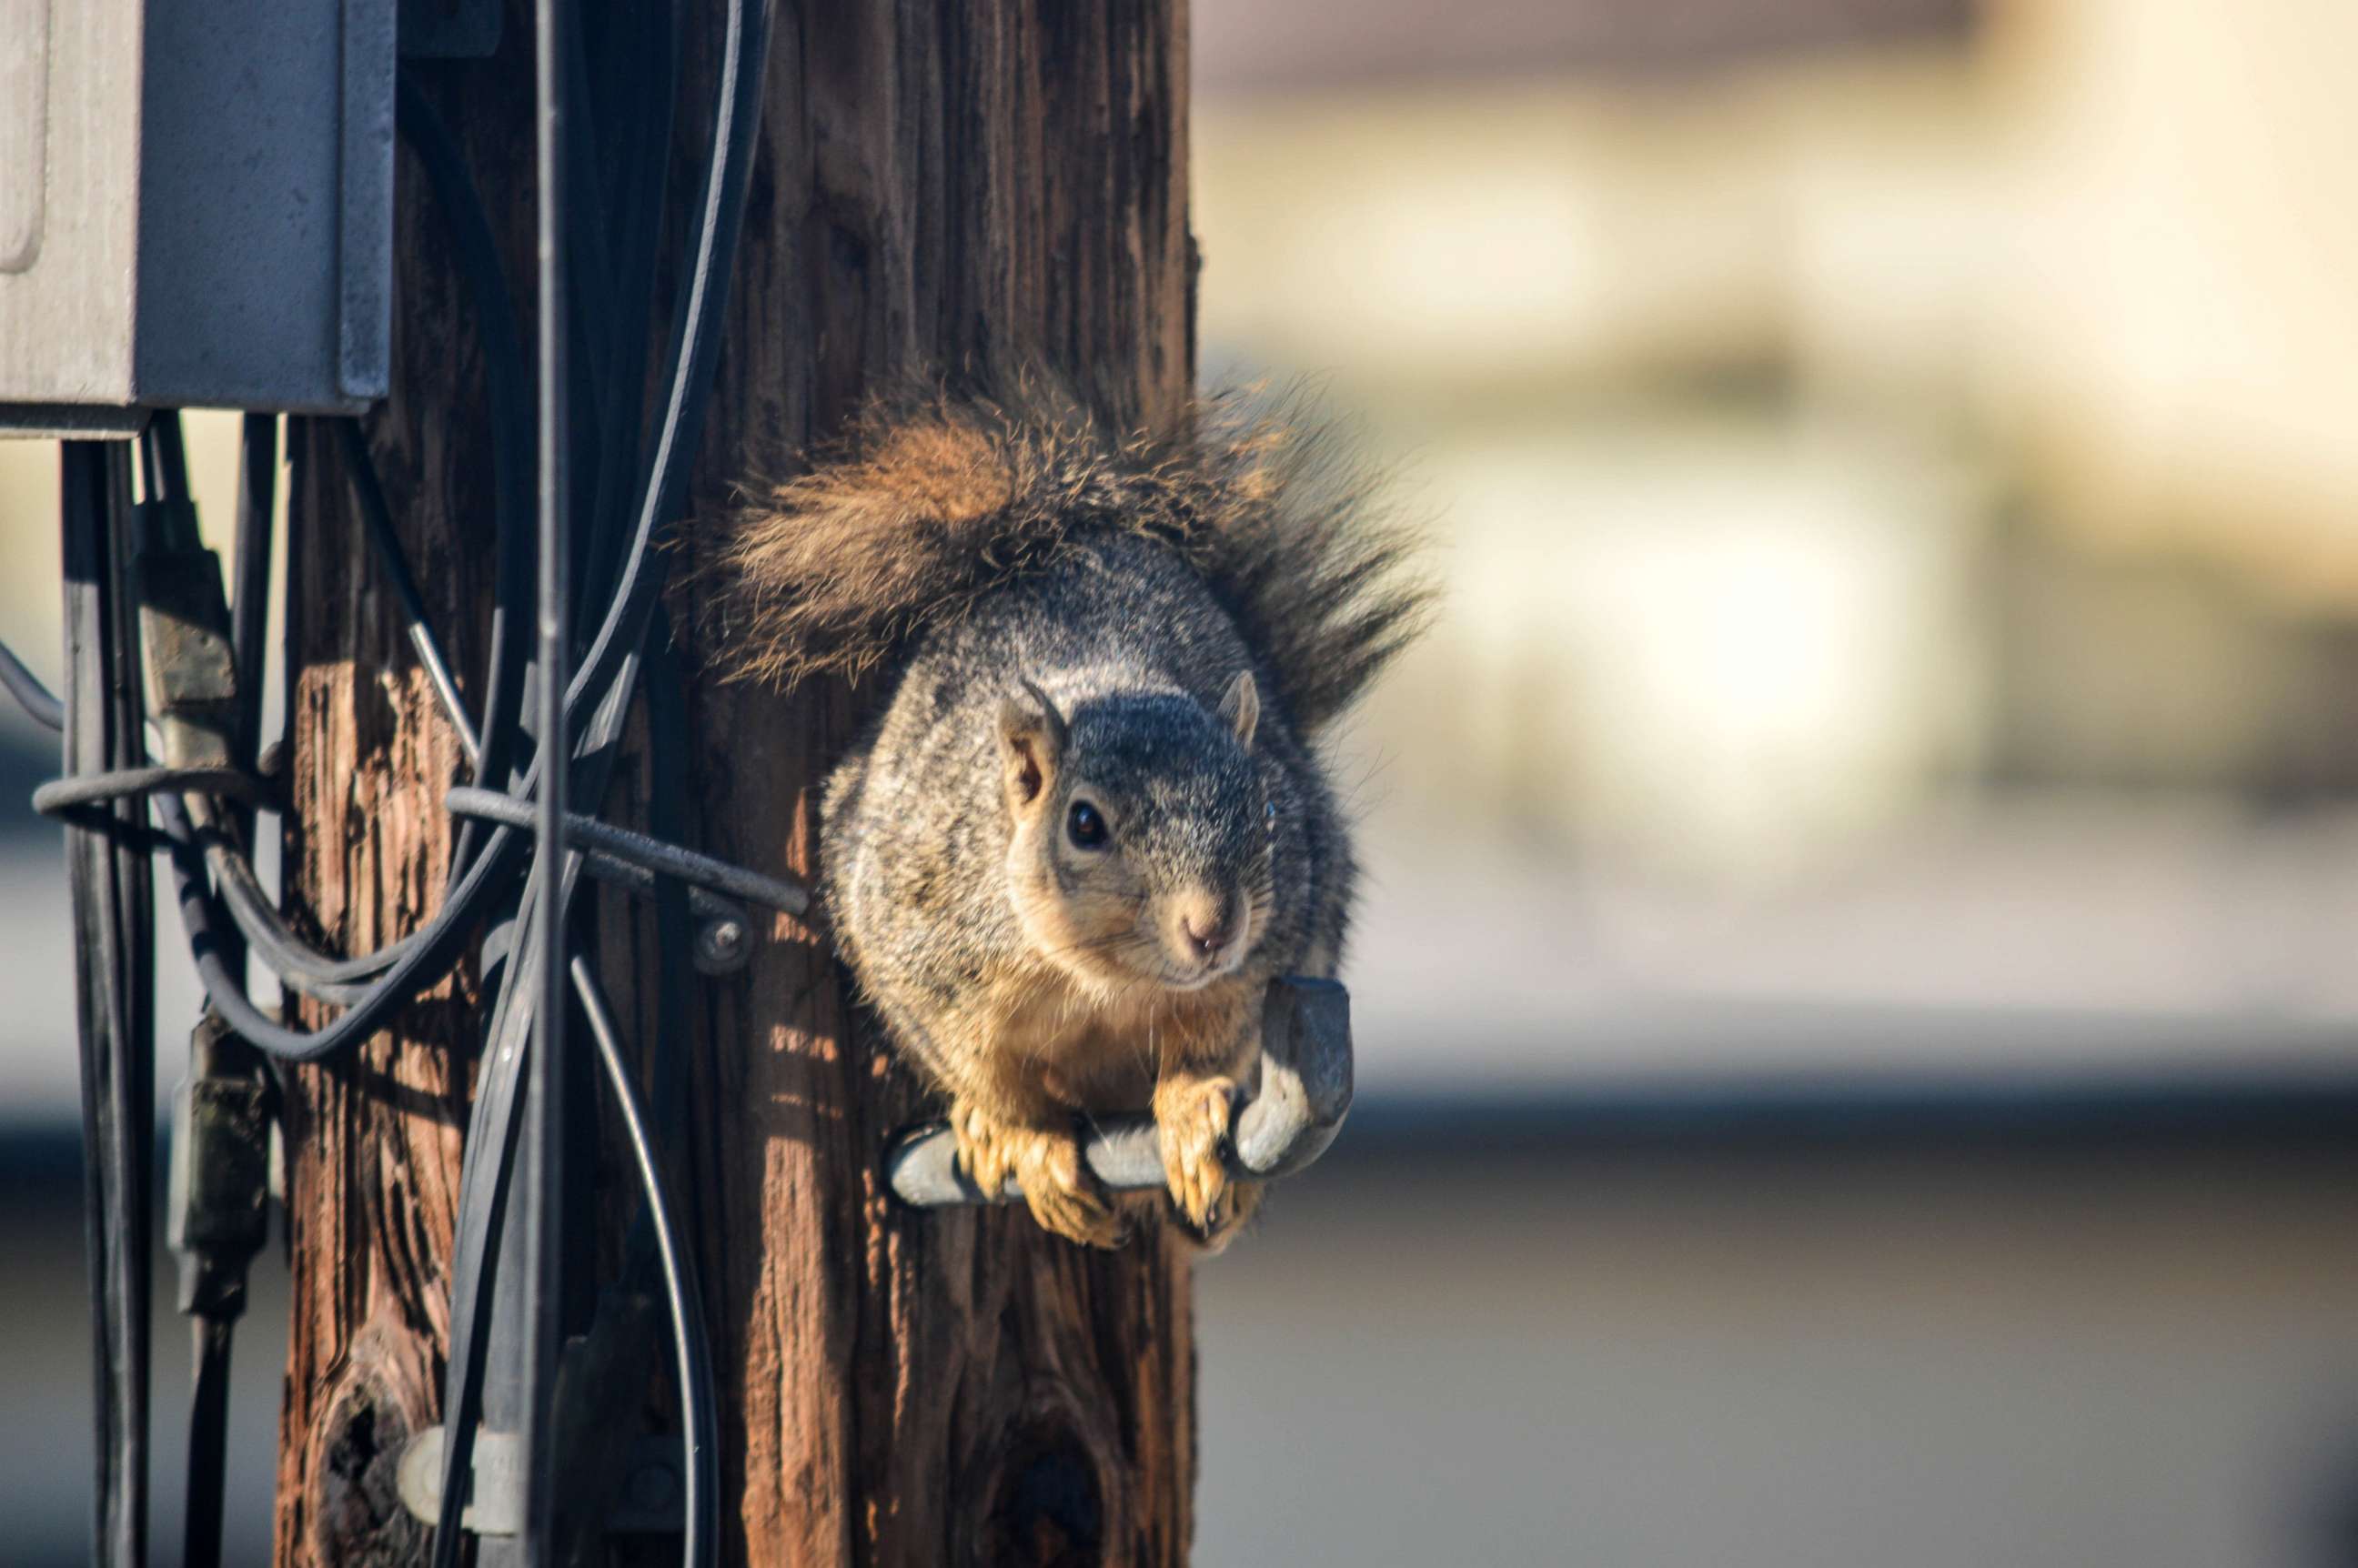 PHOTO: A squirrel on a electric pole.